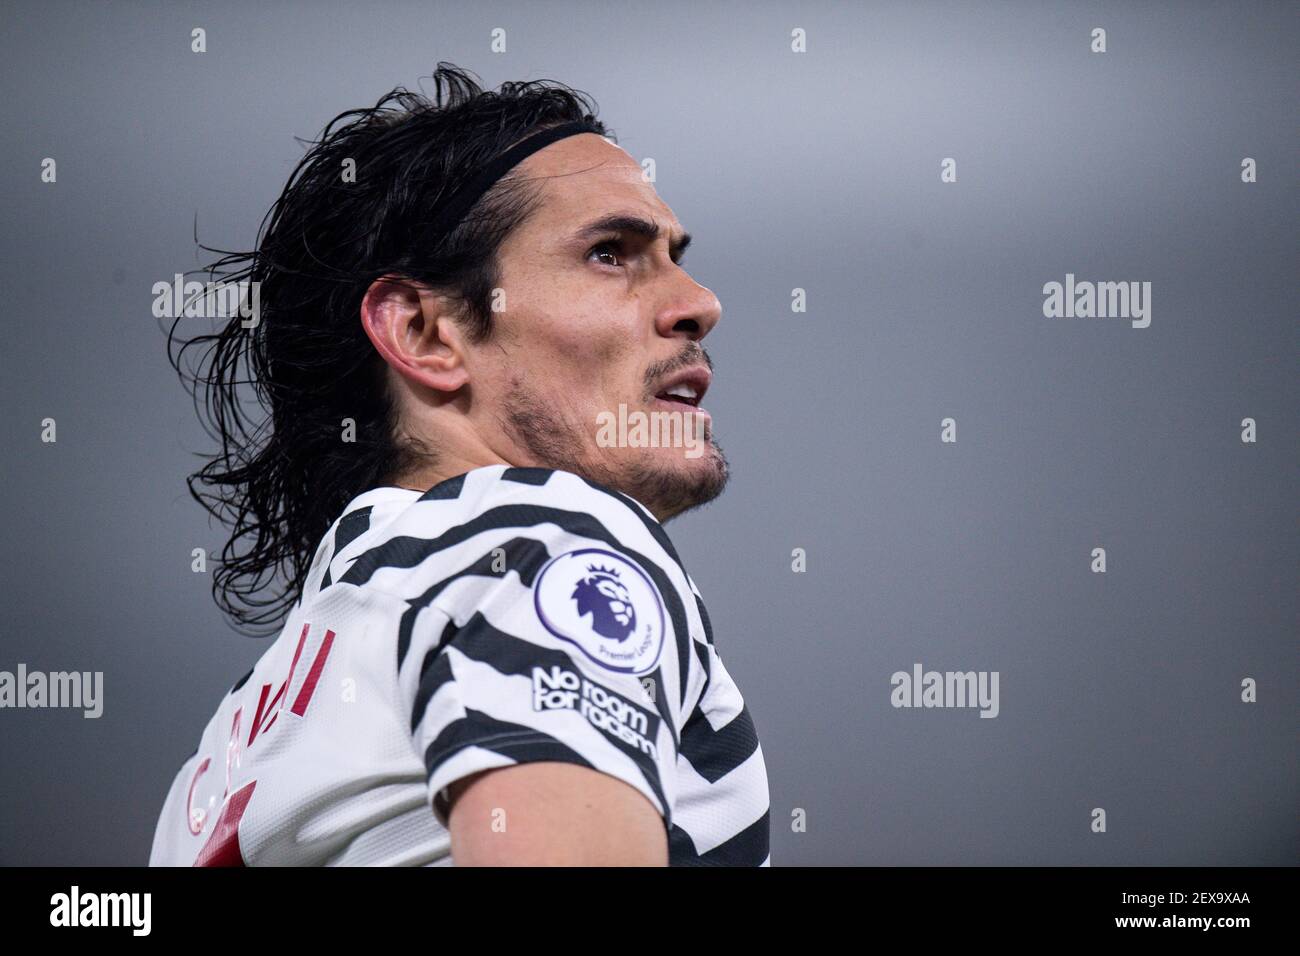 LONDON, ENGLAND - MARCH 03: Edinson Cavani during the Premier League match between Crystal Palace and Manchester United at Selhurst Park on March 3, 2 Stock Photo